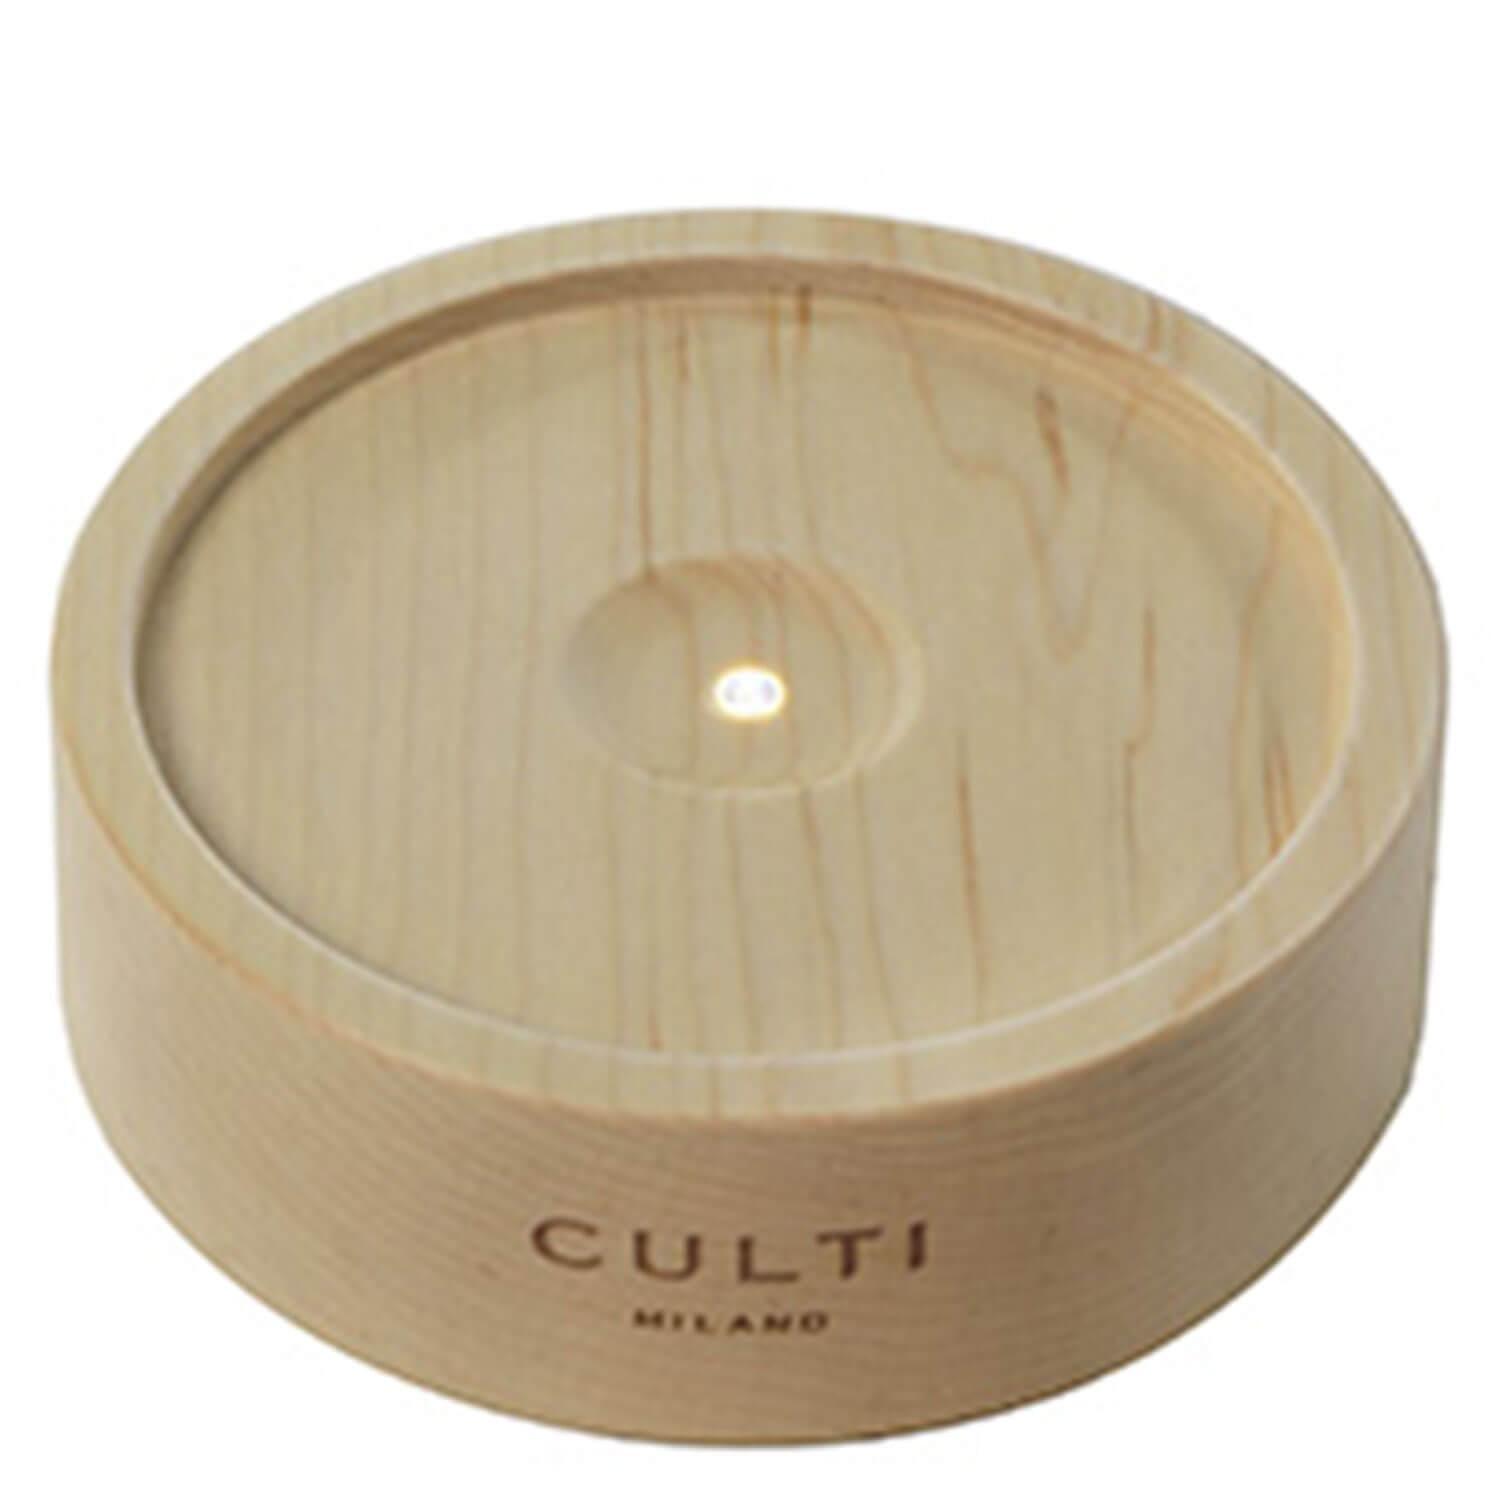 CULTI Diffuser - Stile Lighted Wooden Base